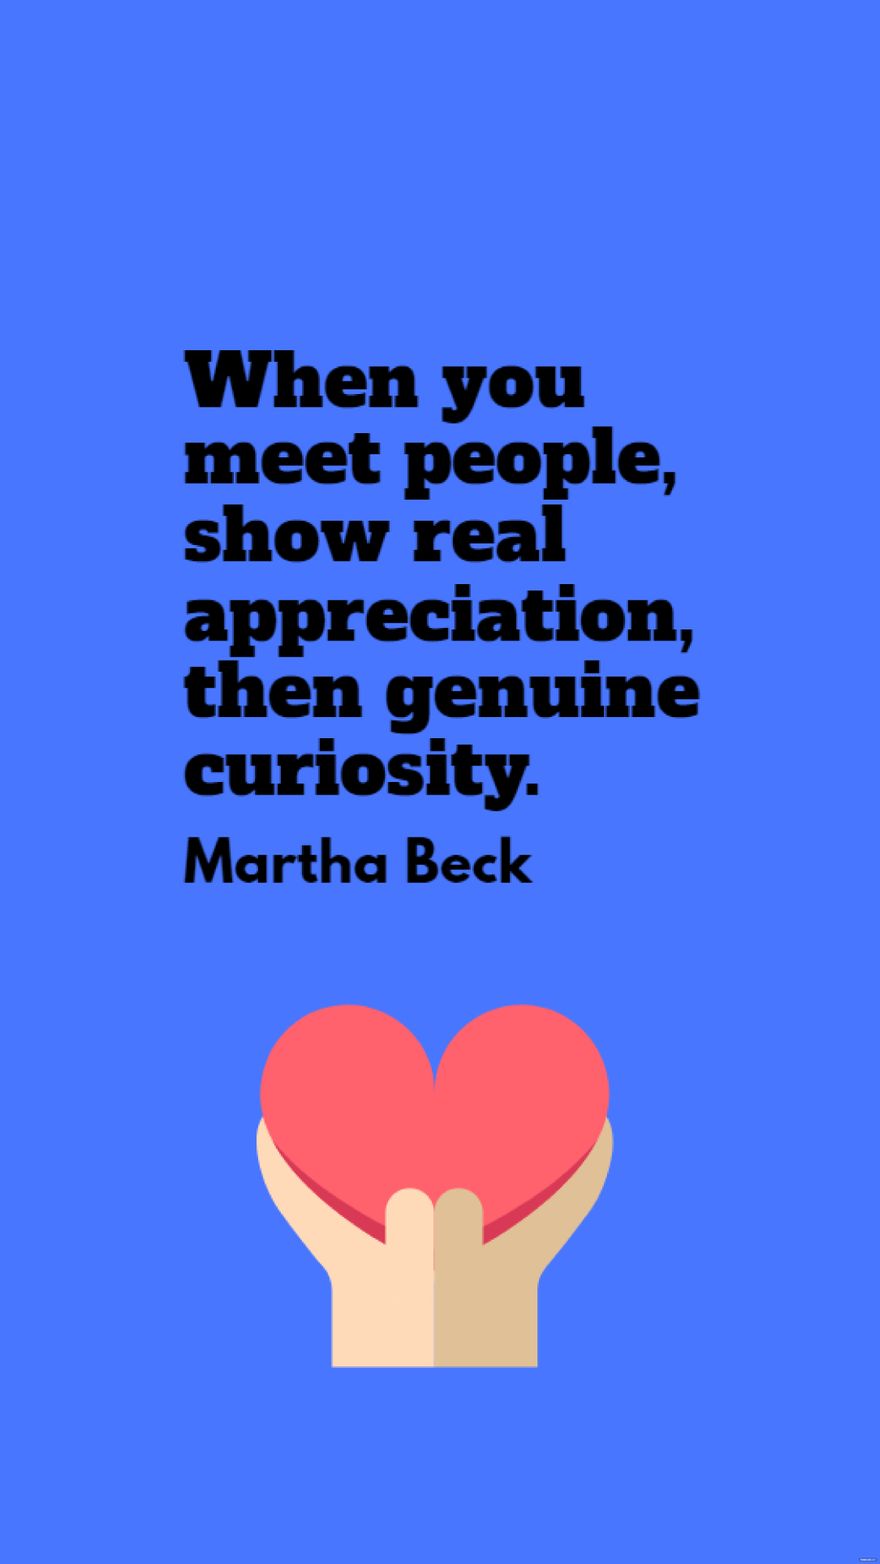 Free Martha Beck - When you meet people, show real appreciation, then genuine curiosity. in JPG